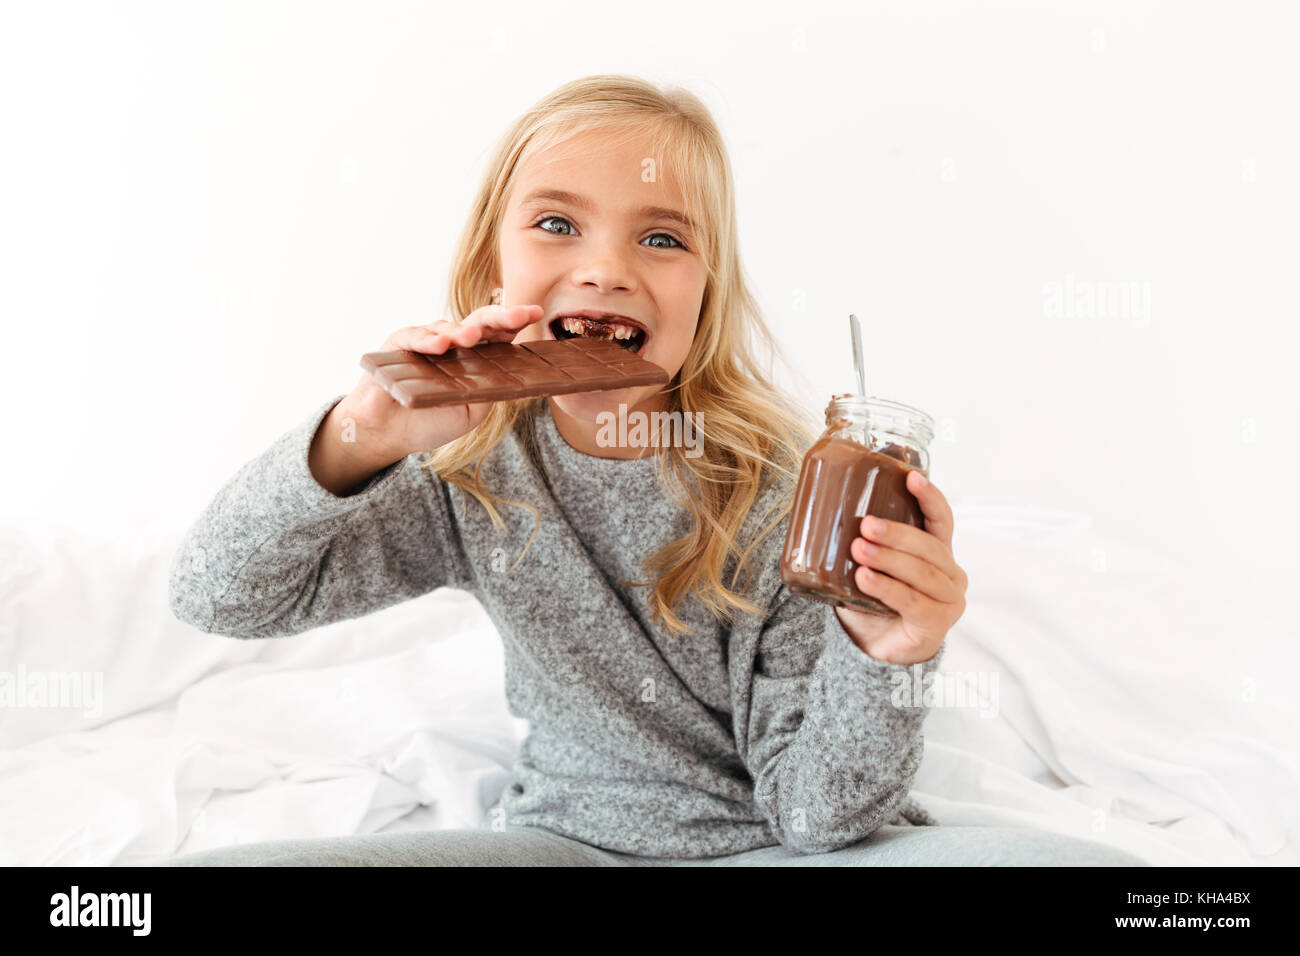 Close-up photo of funny little girl eating chocolate bar looking at camera while sitting on bed Stock Photo